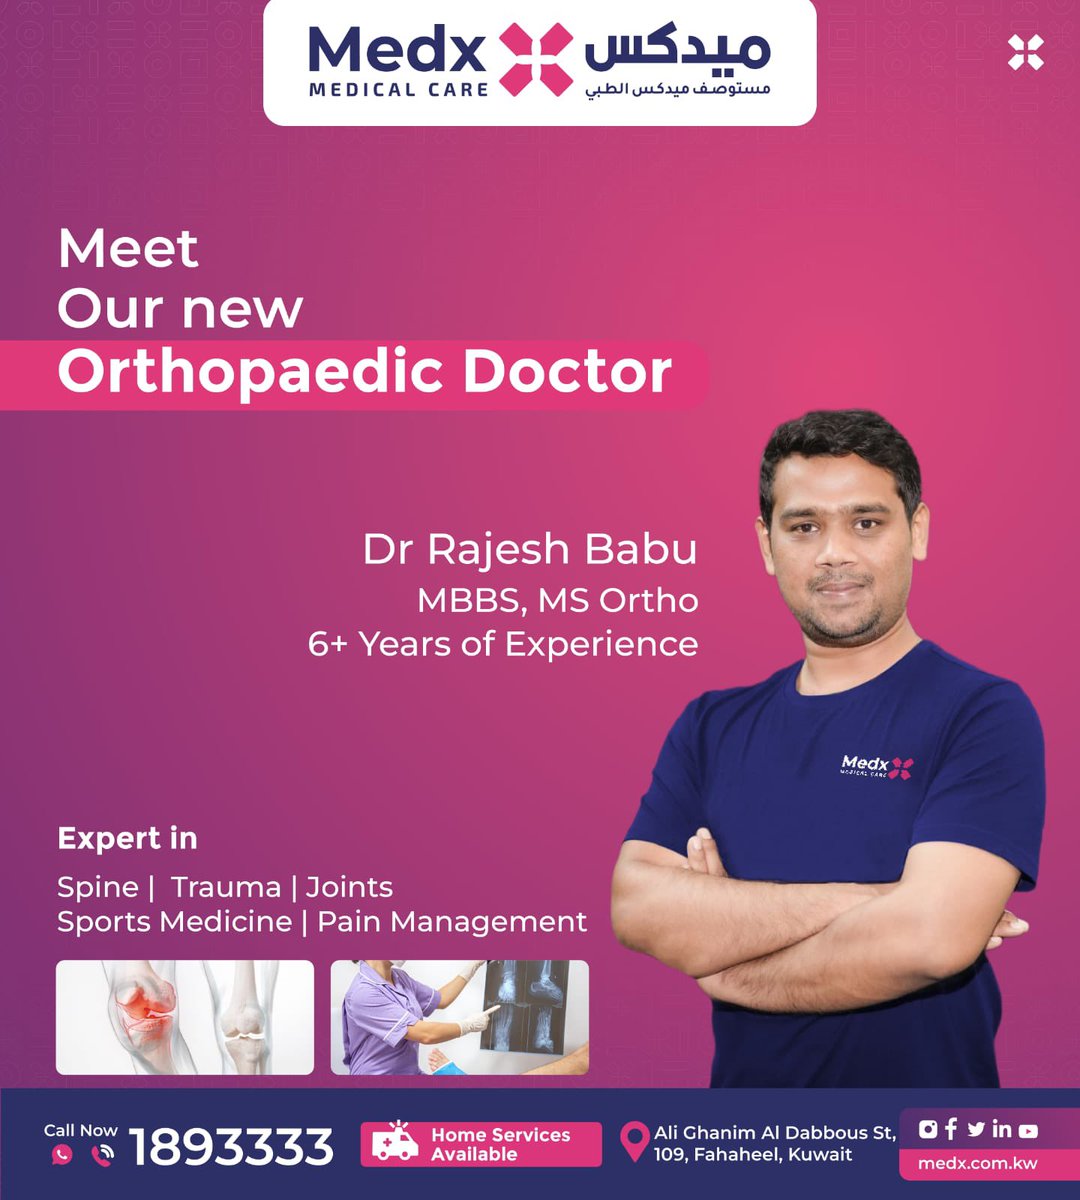 The best orthopaedician providing excellent treatment at Medx Medical care ....

You can simply sit back relax and be assured of complete healing through the efforts of accomplished Medical practitioner 
Dr Rajesh Babu trained in the best centres in India....

#fahaheelkuwait